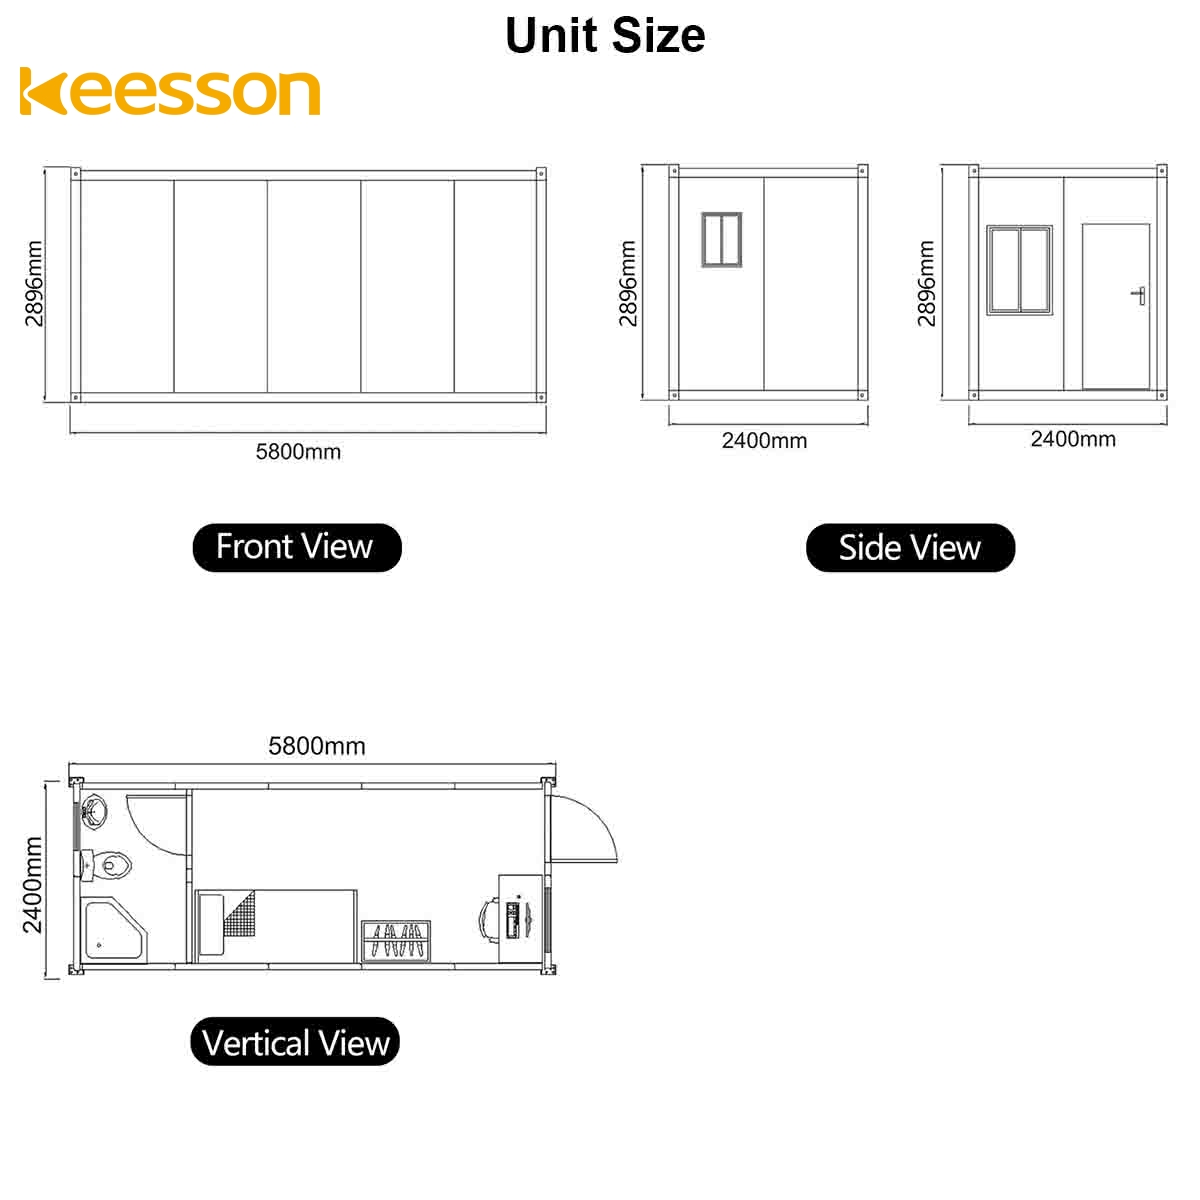 KEESSON container size infomation iamge